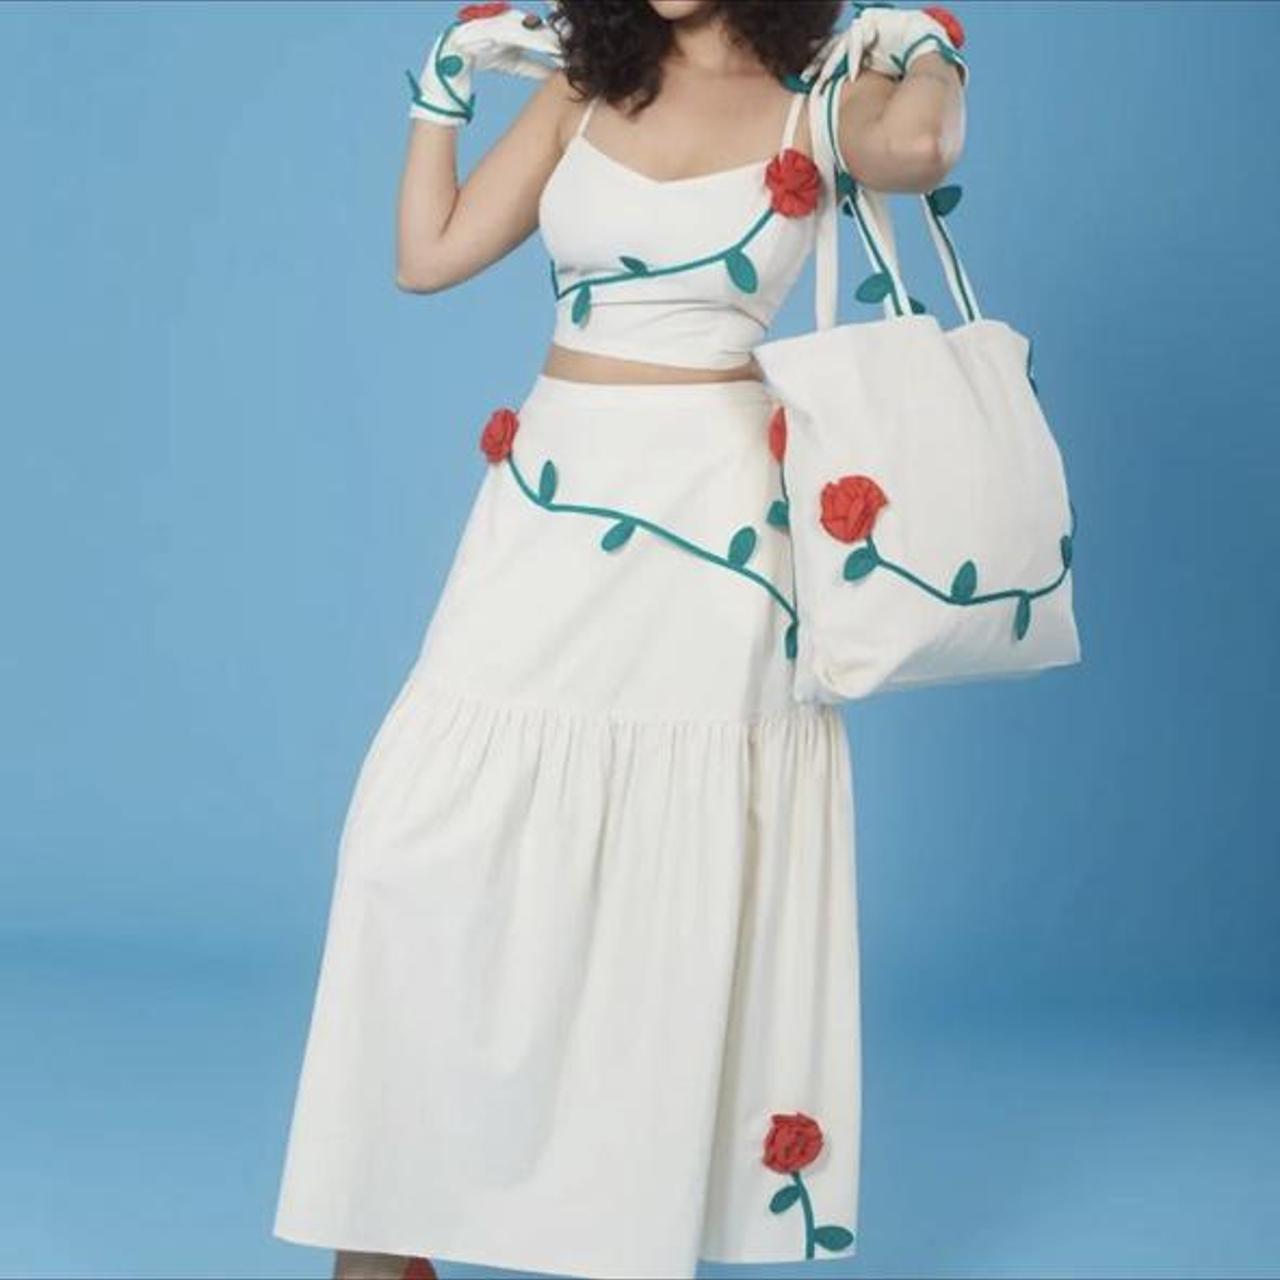 Product Image 2 - Samantha Pleet Persephone Tote NWT

This